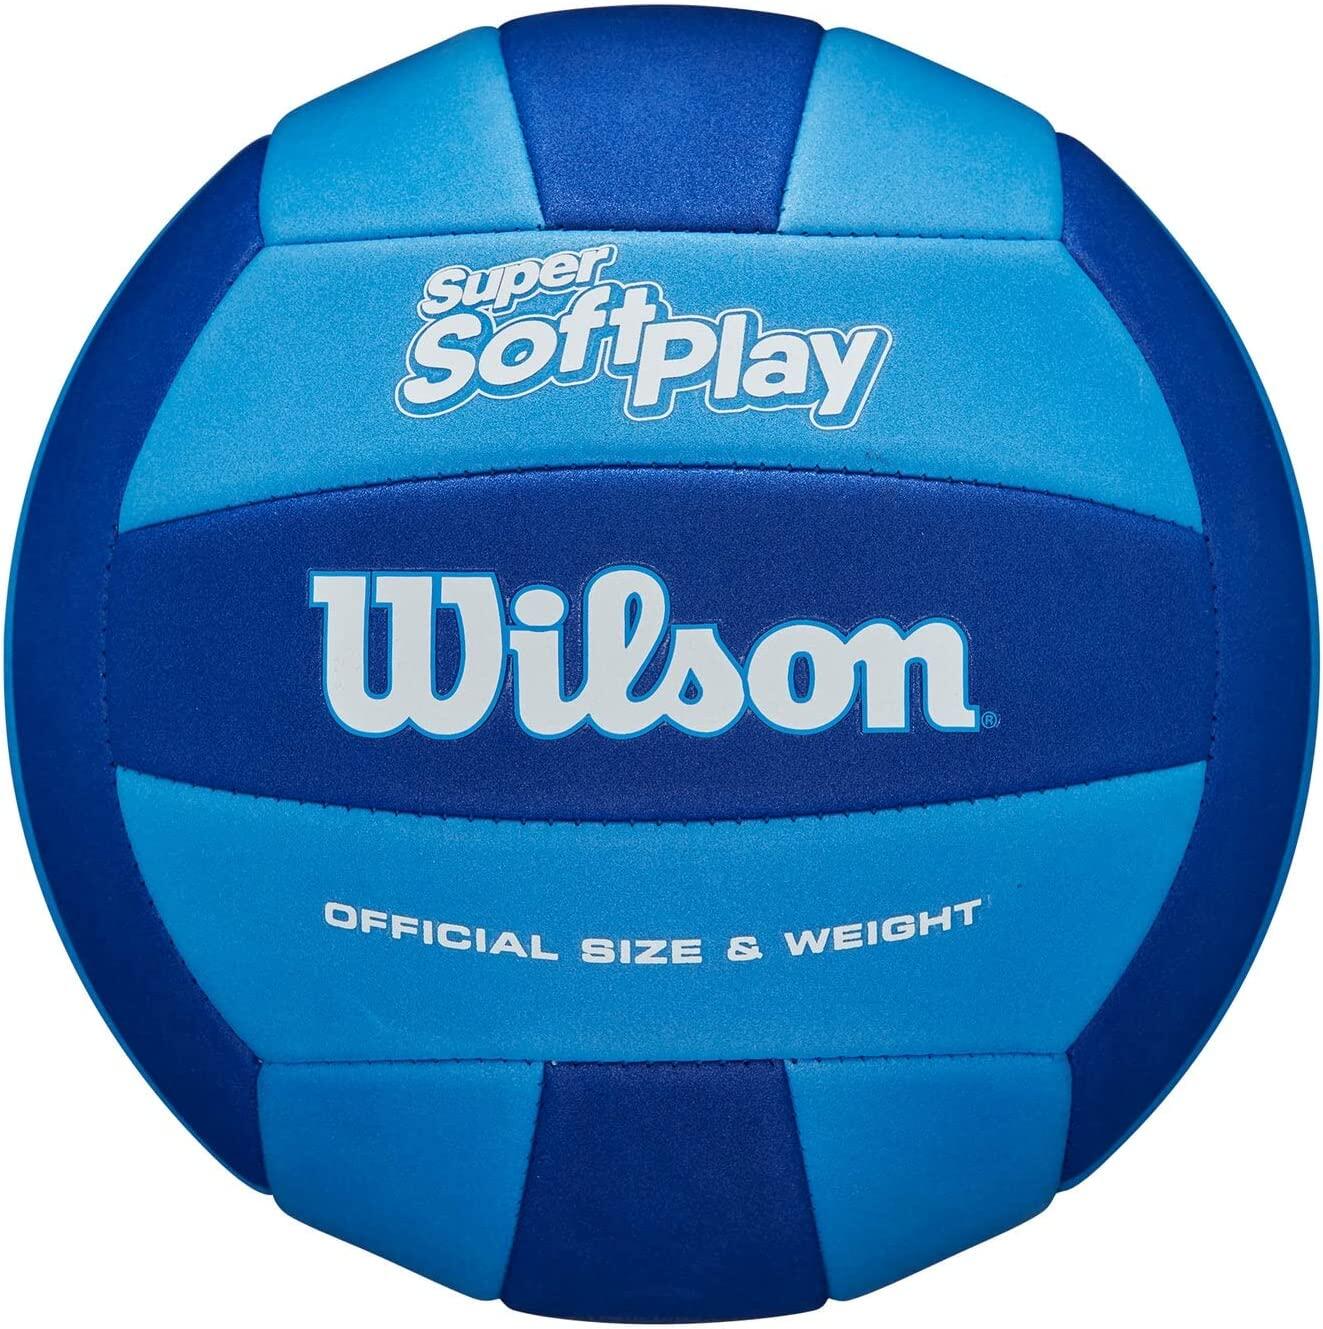 WILSON SUPER SOFT PLAY VOLLEYBALL - OFFICIAL SIZE 1/6